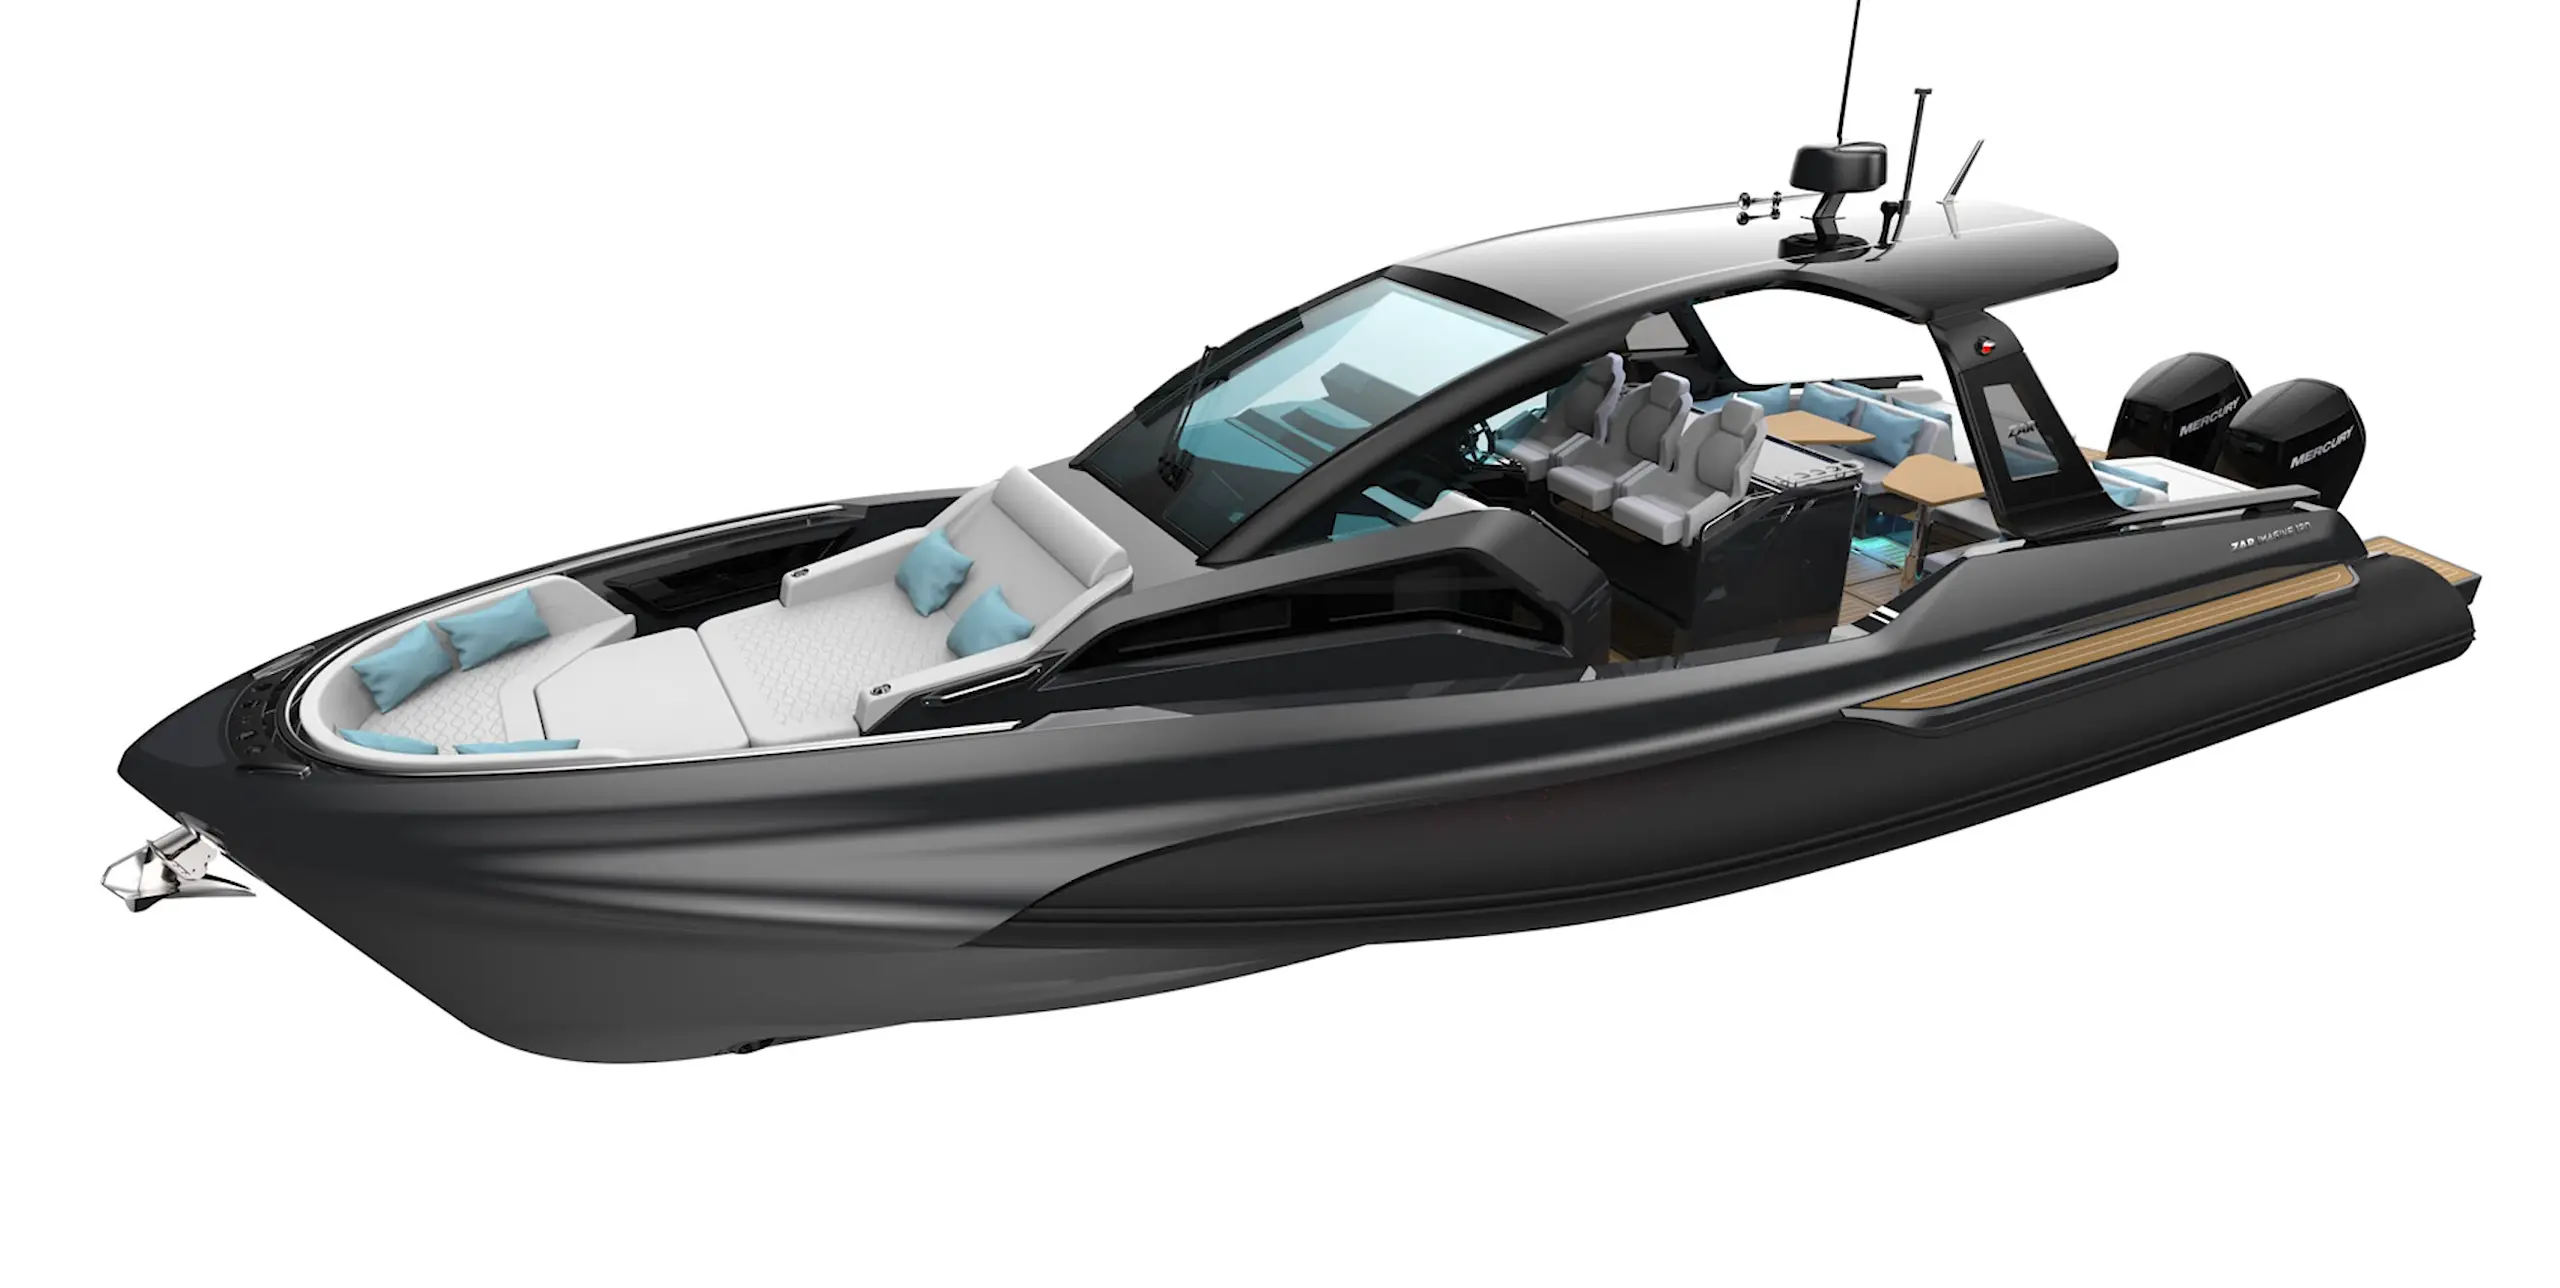 ZAR IMAGINE 130 - MAXI RIB by ZAR FORMENTI @ RIBs ONLY - Home of the Rigid Inflatable Boat